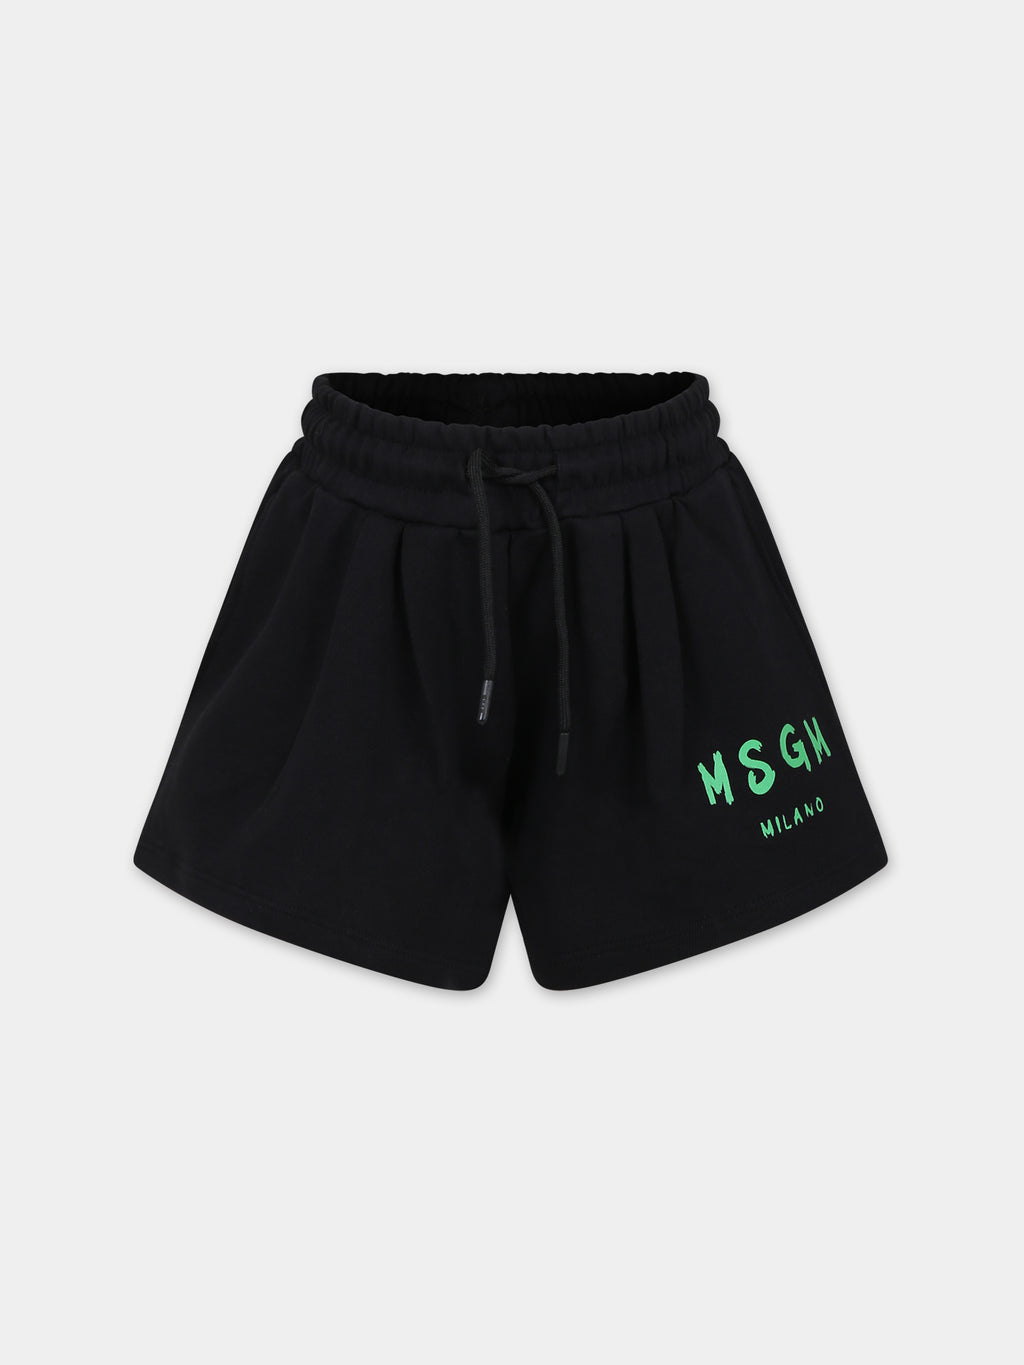 Black shorts for girl with logo